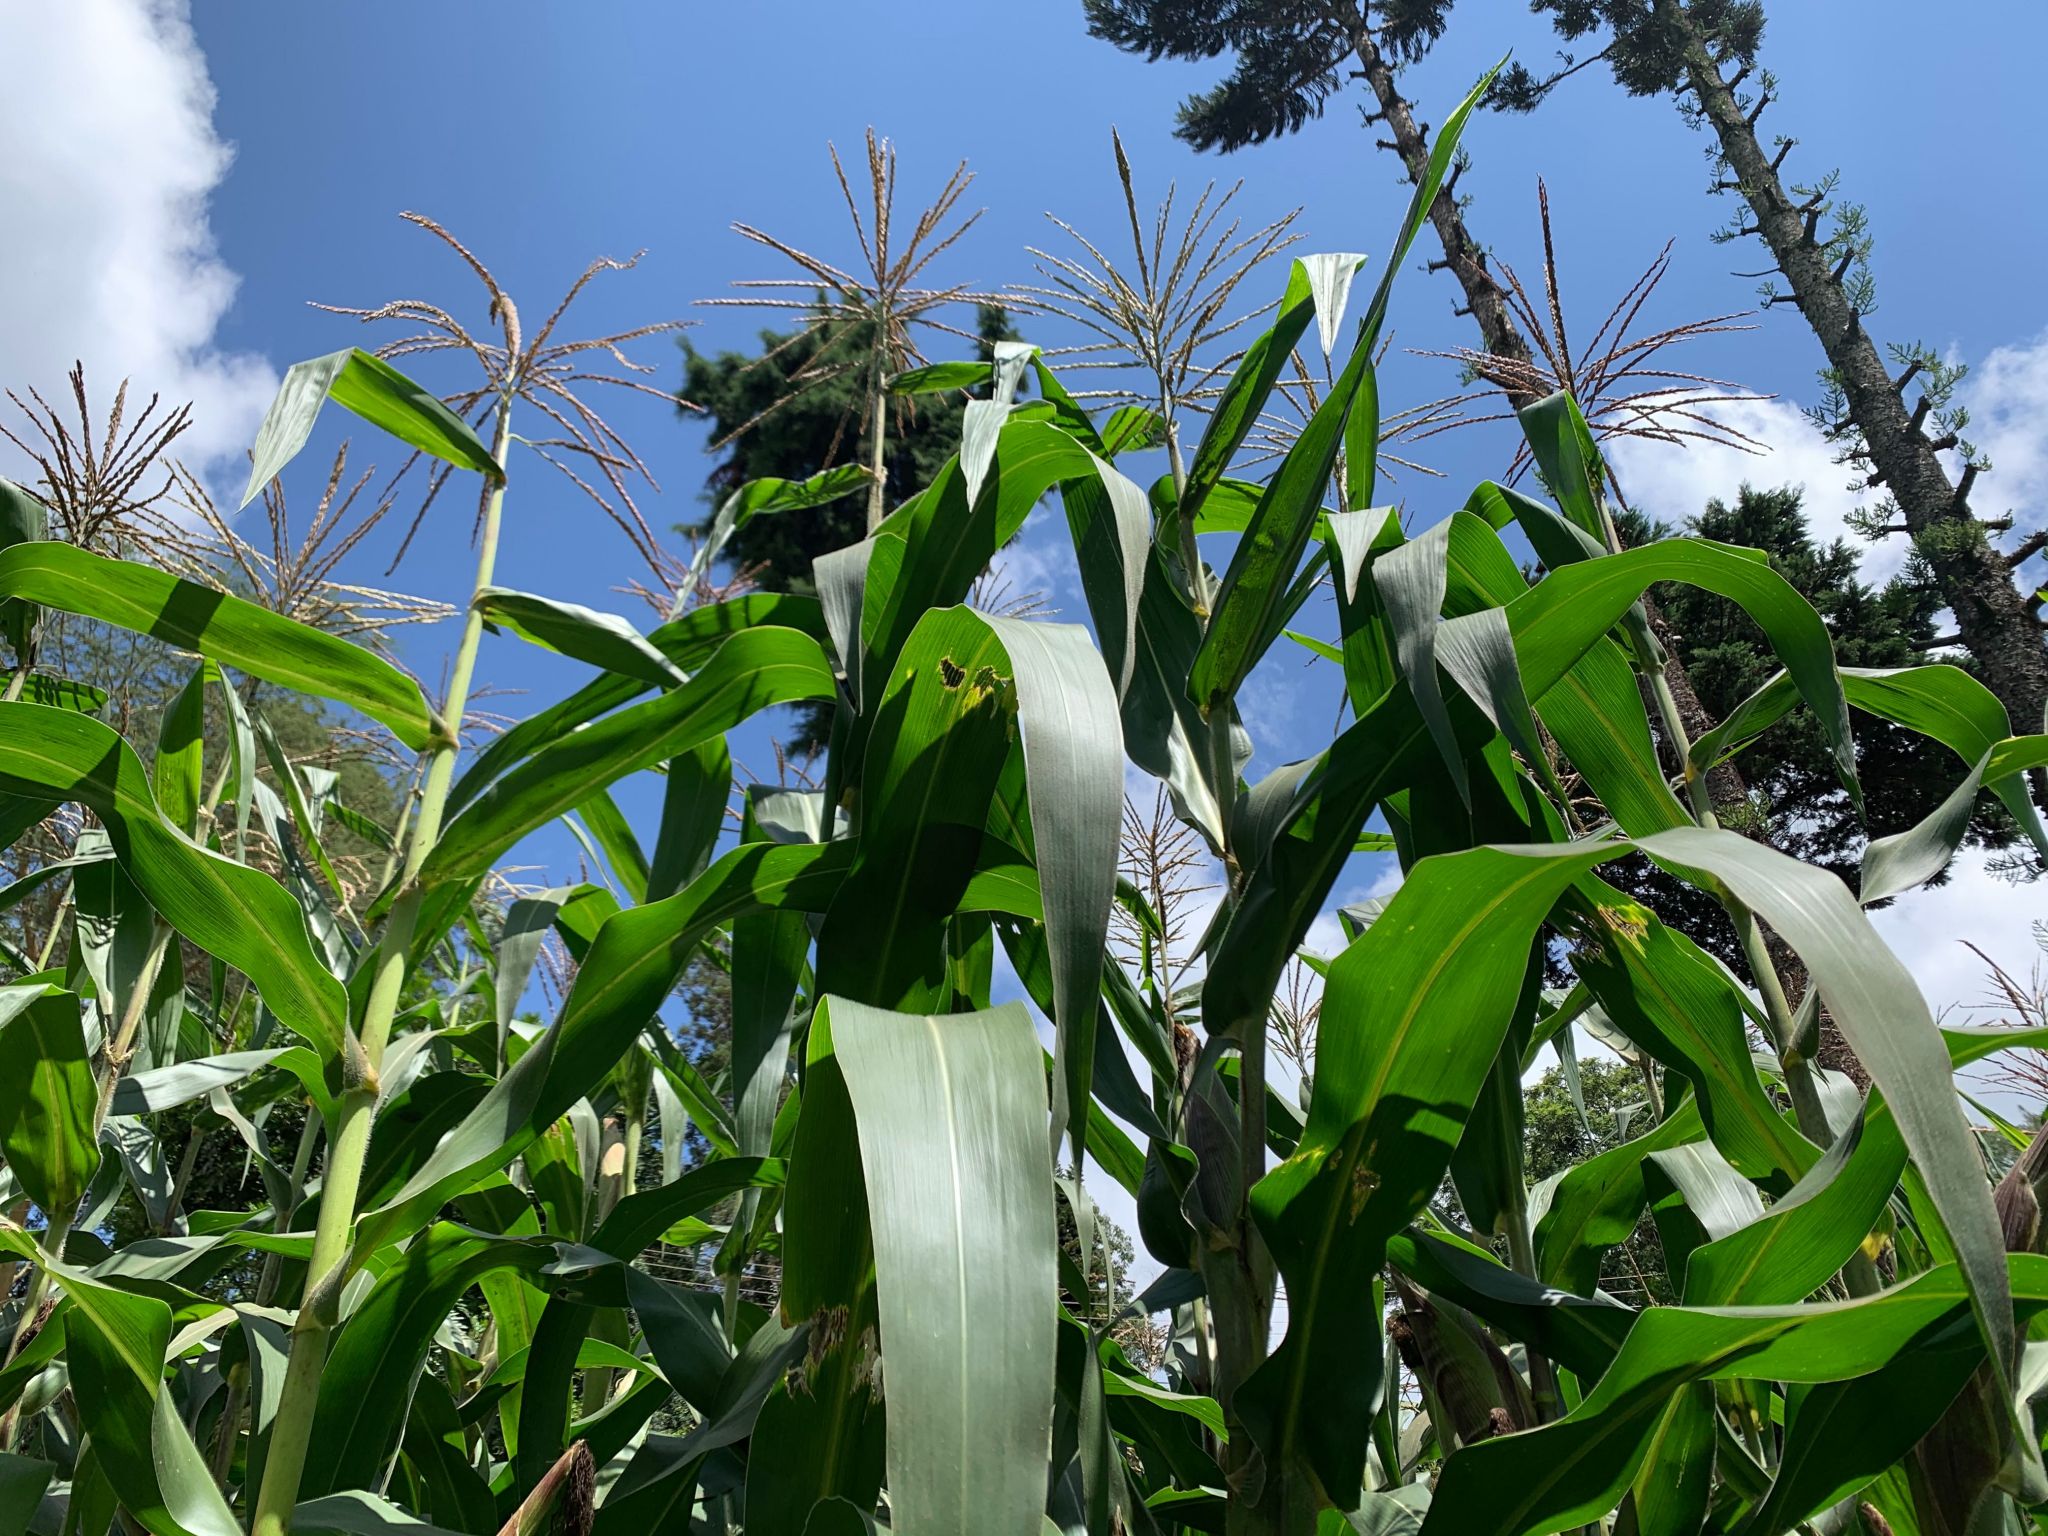 Maize growing in a test field that is experimenting with seed varietals